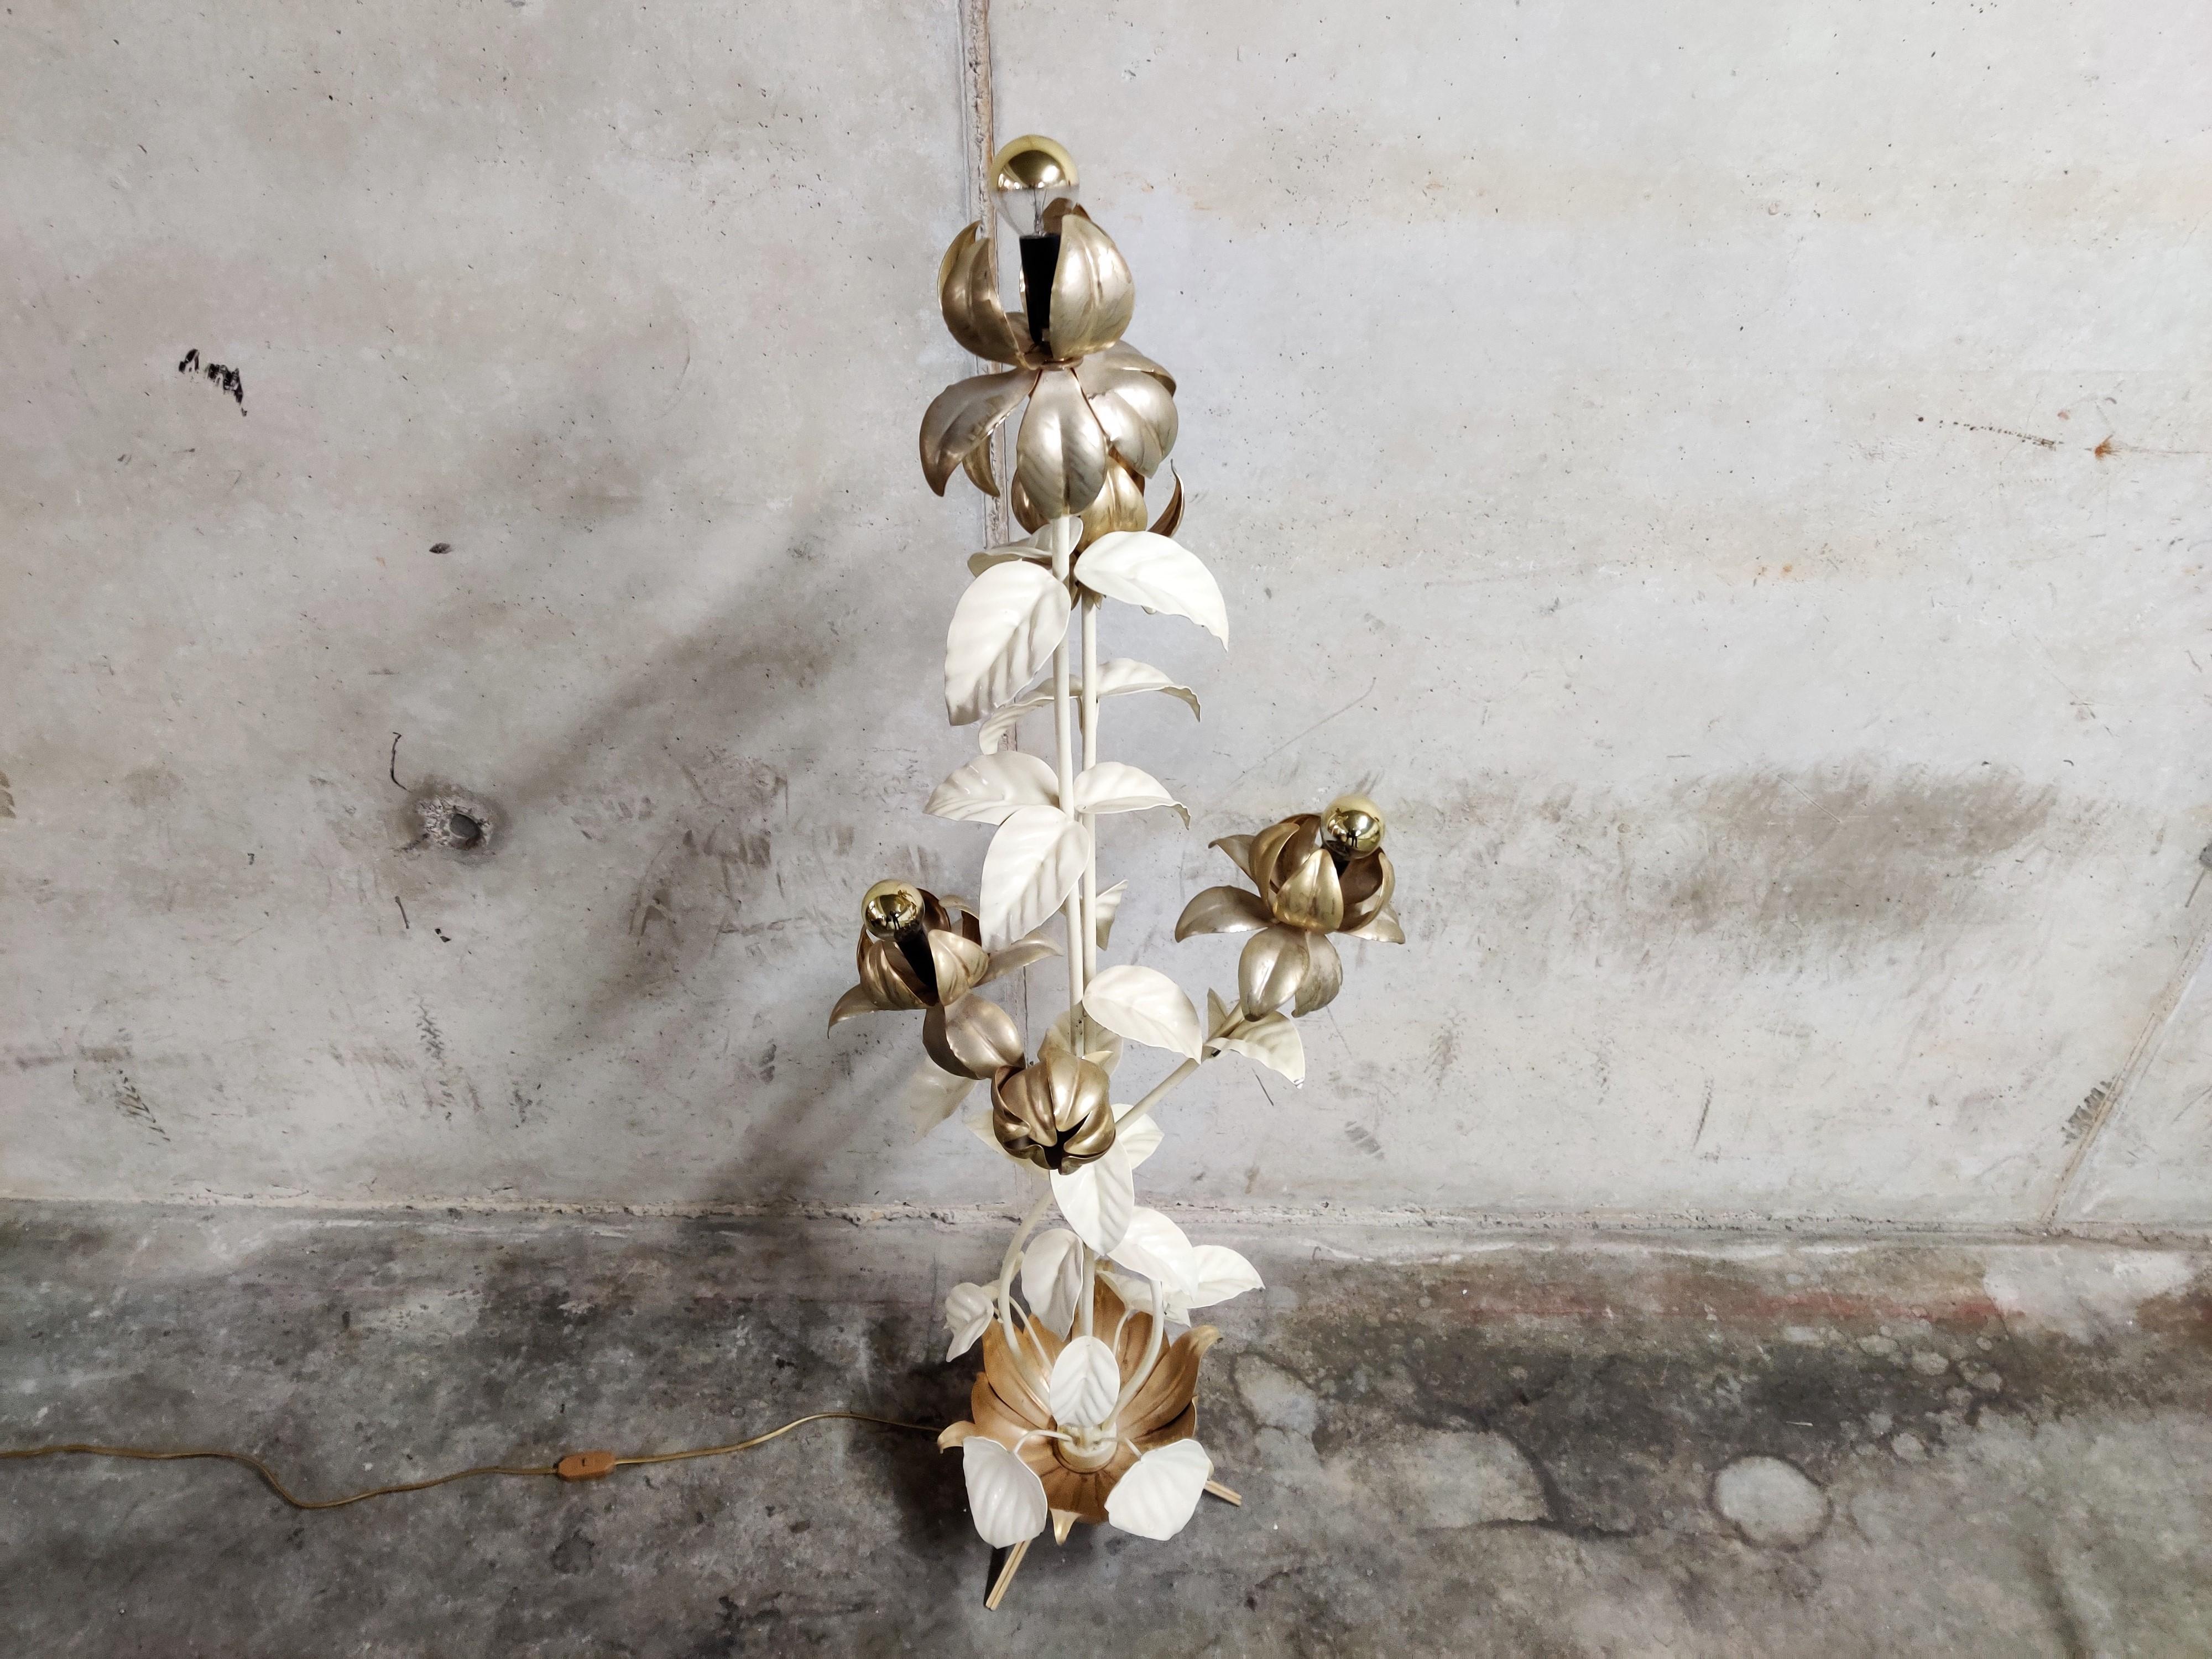 Midcentury Italian gilt metal flower floor lamp in the style of Hans Kögl.

The lamp consist of gilt metal and white enameled flowers/leafs

The floor lamp emits an amazing light.

Very good condition.

Comes with a foot switch.

Tested